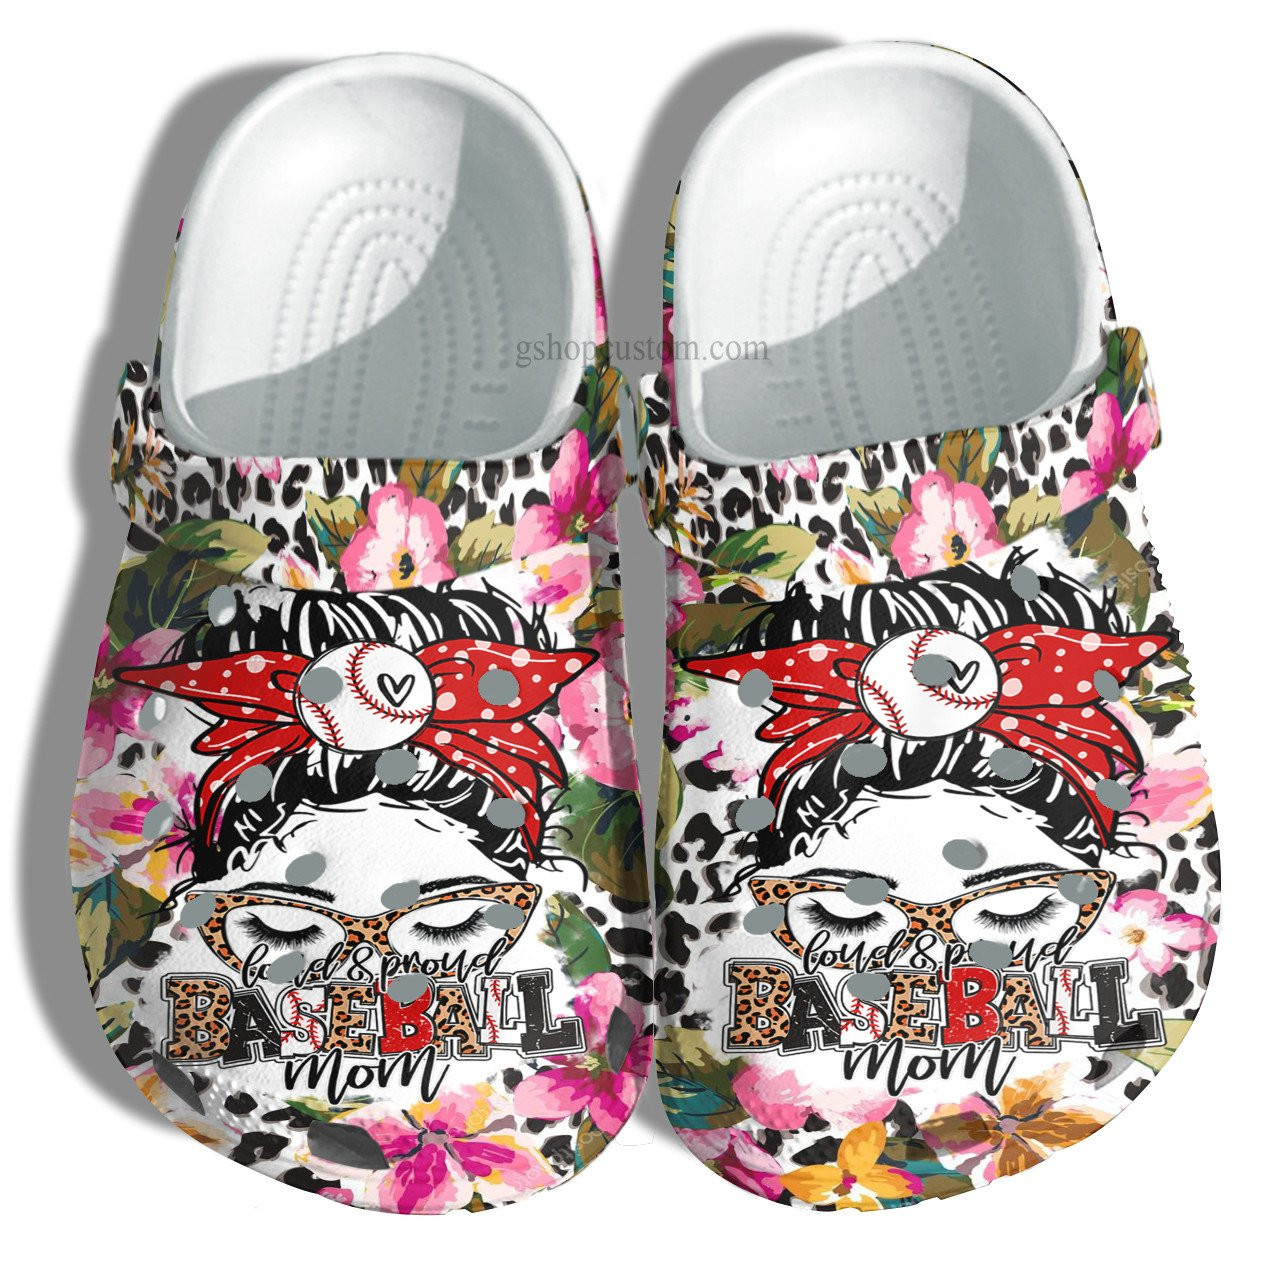 Baseball Mom Flower Cow Crocs Shoes For Wife Mom Grandma – Baseball Mom Cow Shoes Croc Clogs